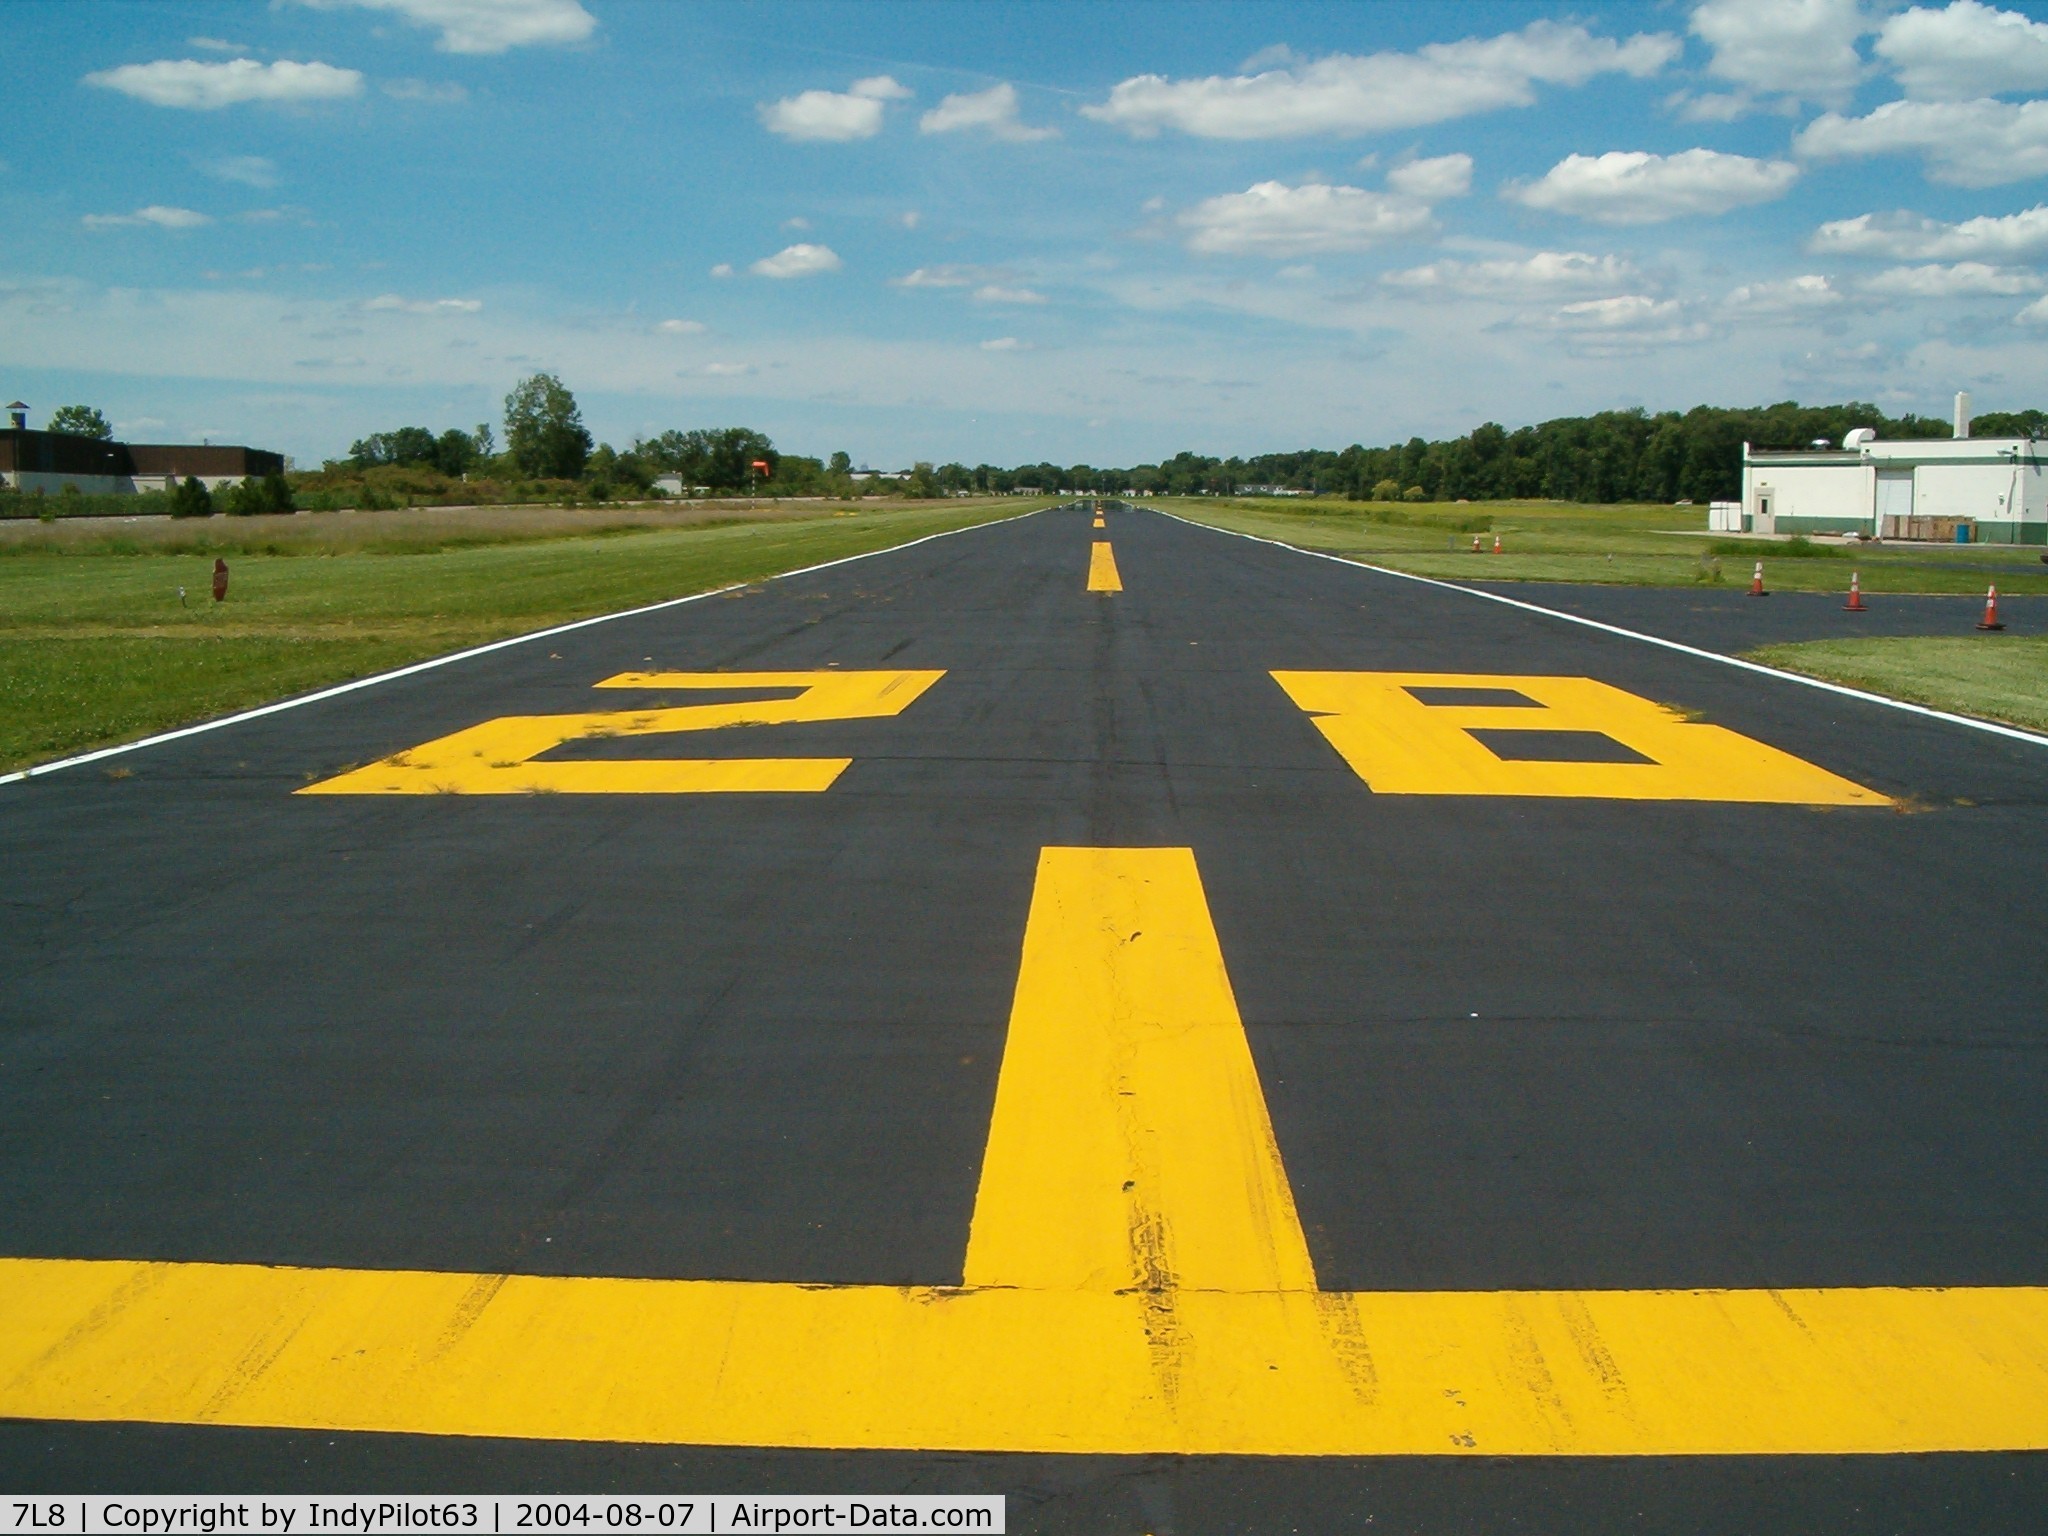 Post-air Airport (7L8) - Runway 28...partially gravel back in the 1980's, now paved.